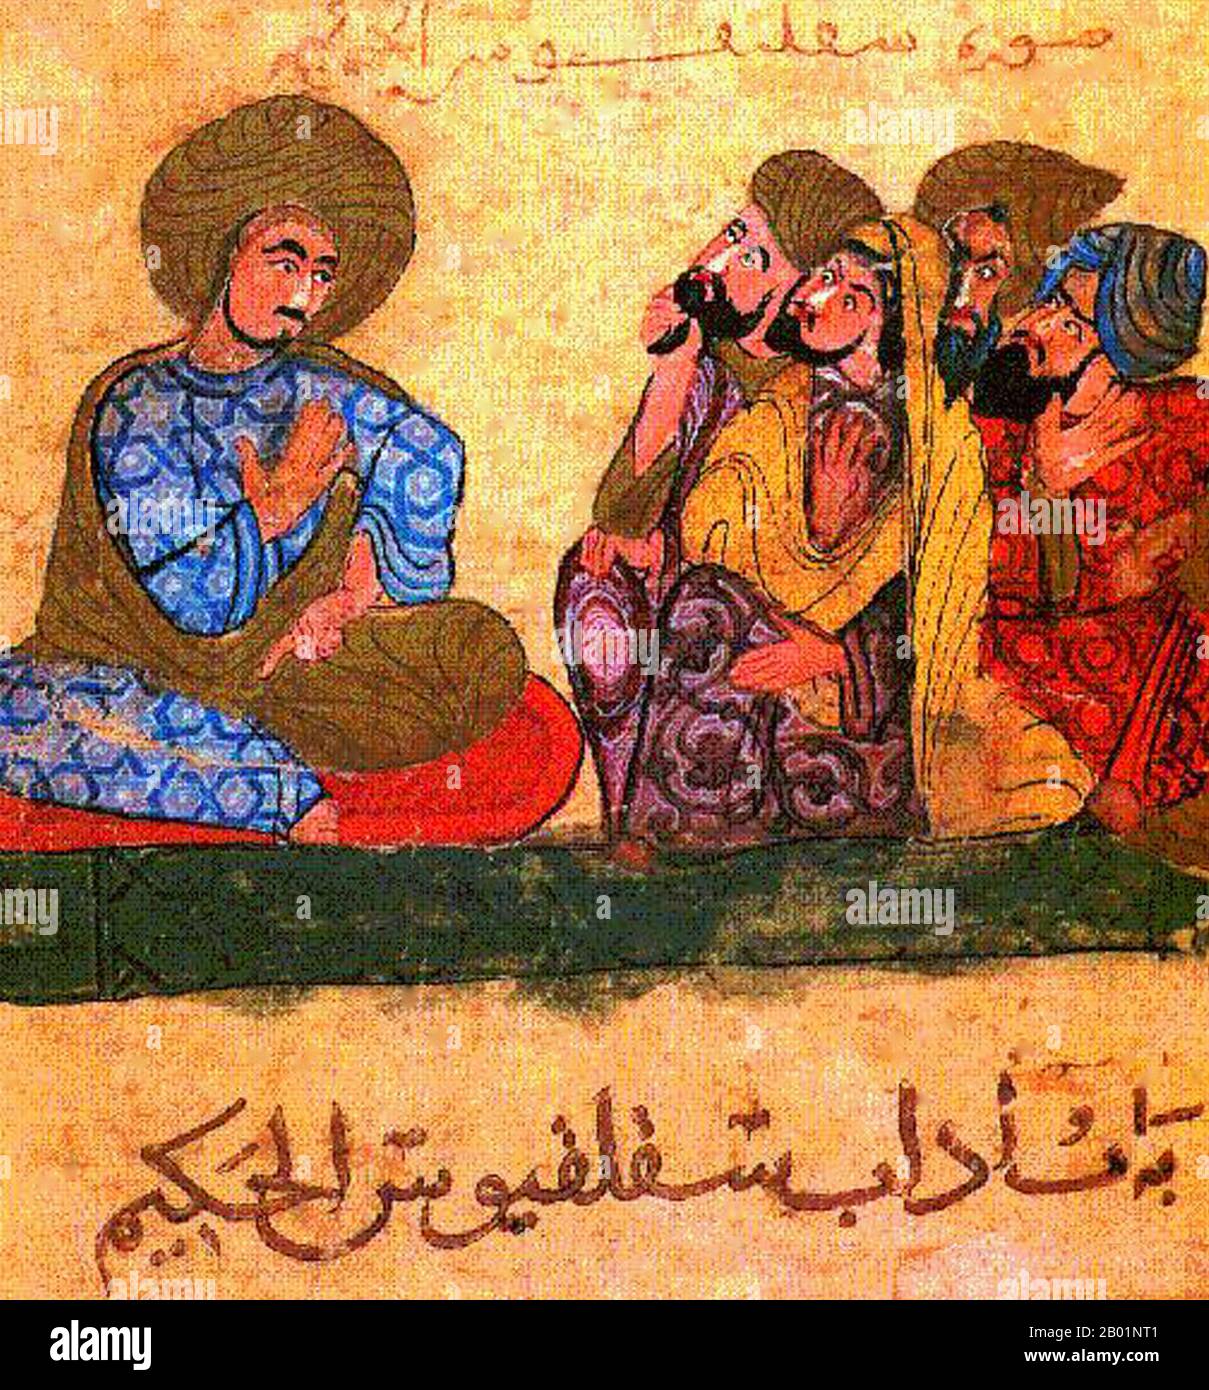 Turkey: The philosopher Sughrat (Socrates) represented with a group of students in an Arabic manuscript, c. 14th century.  Socrates (c. 470-399 BCE) was a classical Greek Athenian philosopher. Credited as one of the founders of Western philosophy, he is an enigmatic figure known chiefly through the accounts of later classical writers, especially the writings of his students Plato and Xenophon, and the plays of his contemporary Aristophanes. Many would claim that Plato's dialogues are the most comprehensive accounts of Socrates to survive from antiquity. Stock Photo